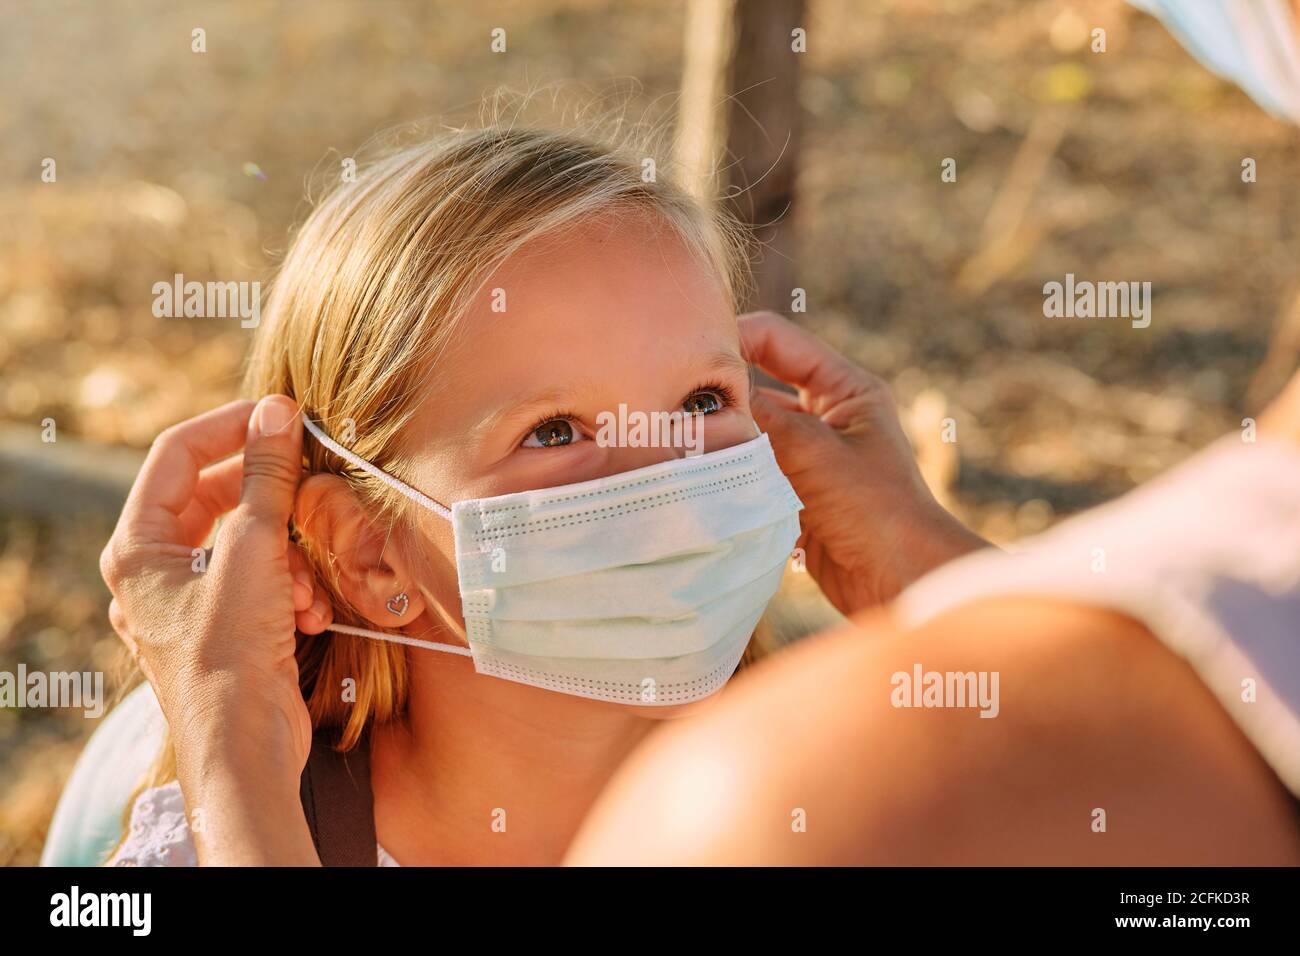 Selective focus on a bright-eyed girl's face while someone puts a mask on her in the middle of a forest Stock Photo